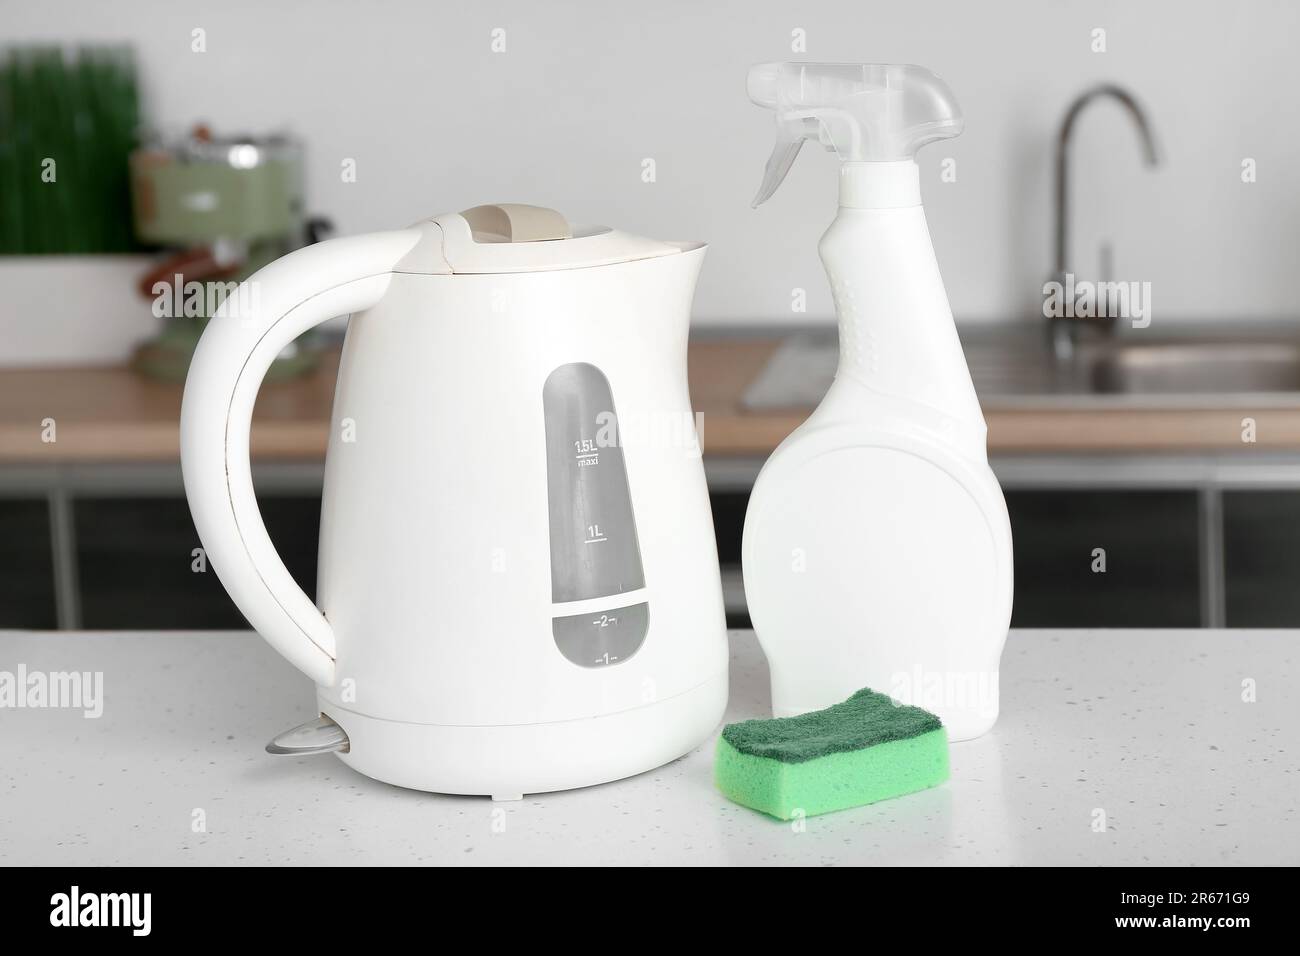 https://c8.alamy.com/comp/2R671G9/electric-kettle-spray-bottle-with-detergent-and-sponge-on-table-in-kitchen-2R671G9.jpg